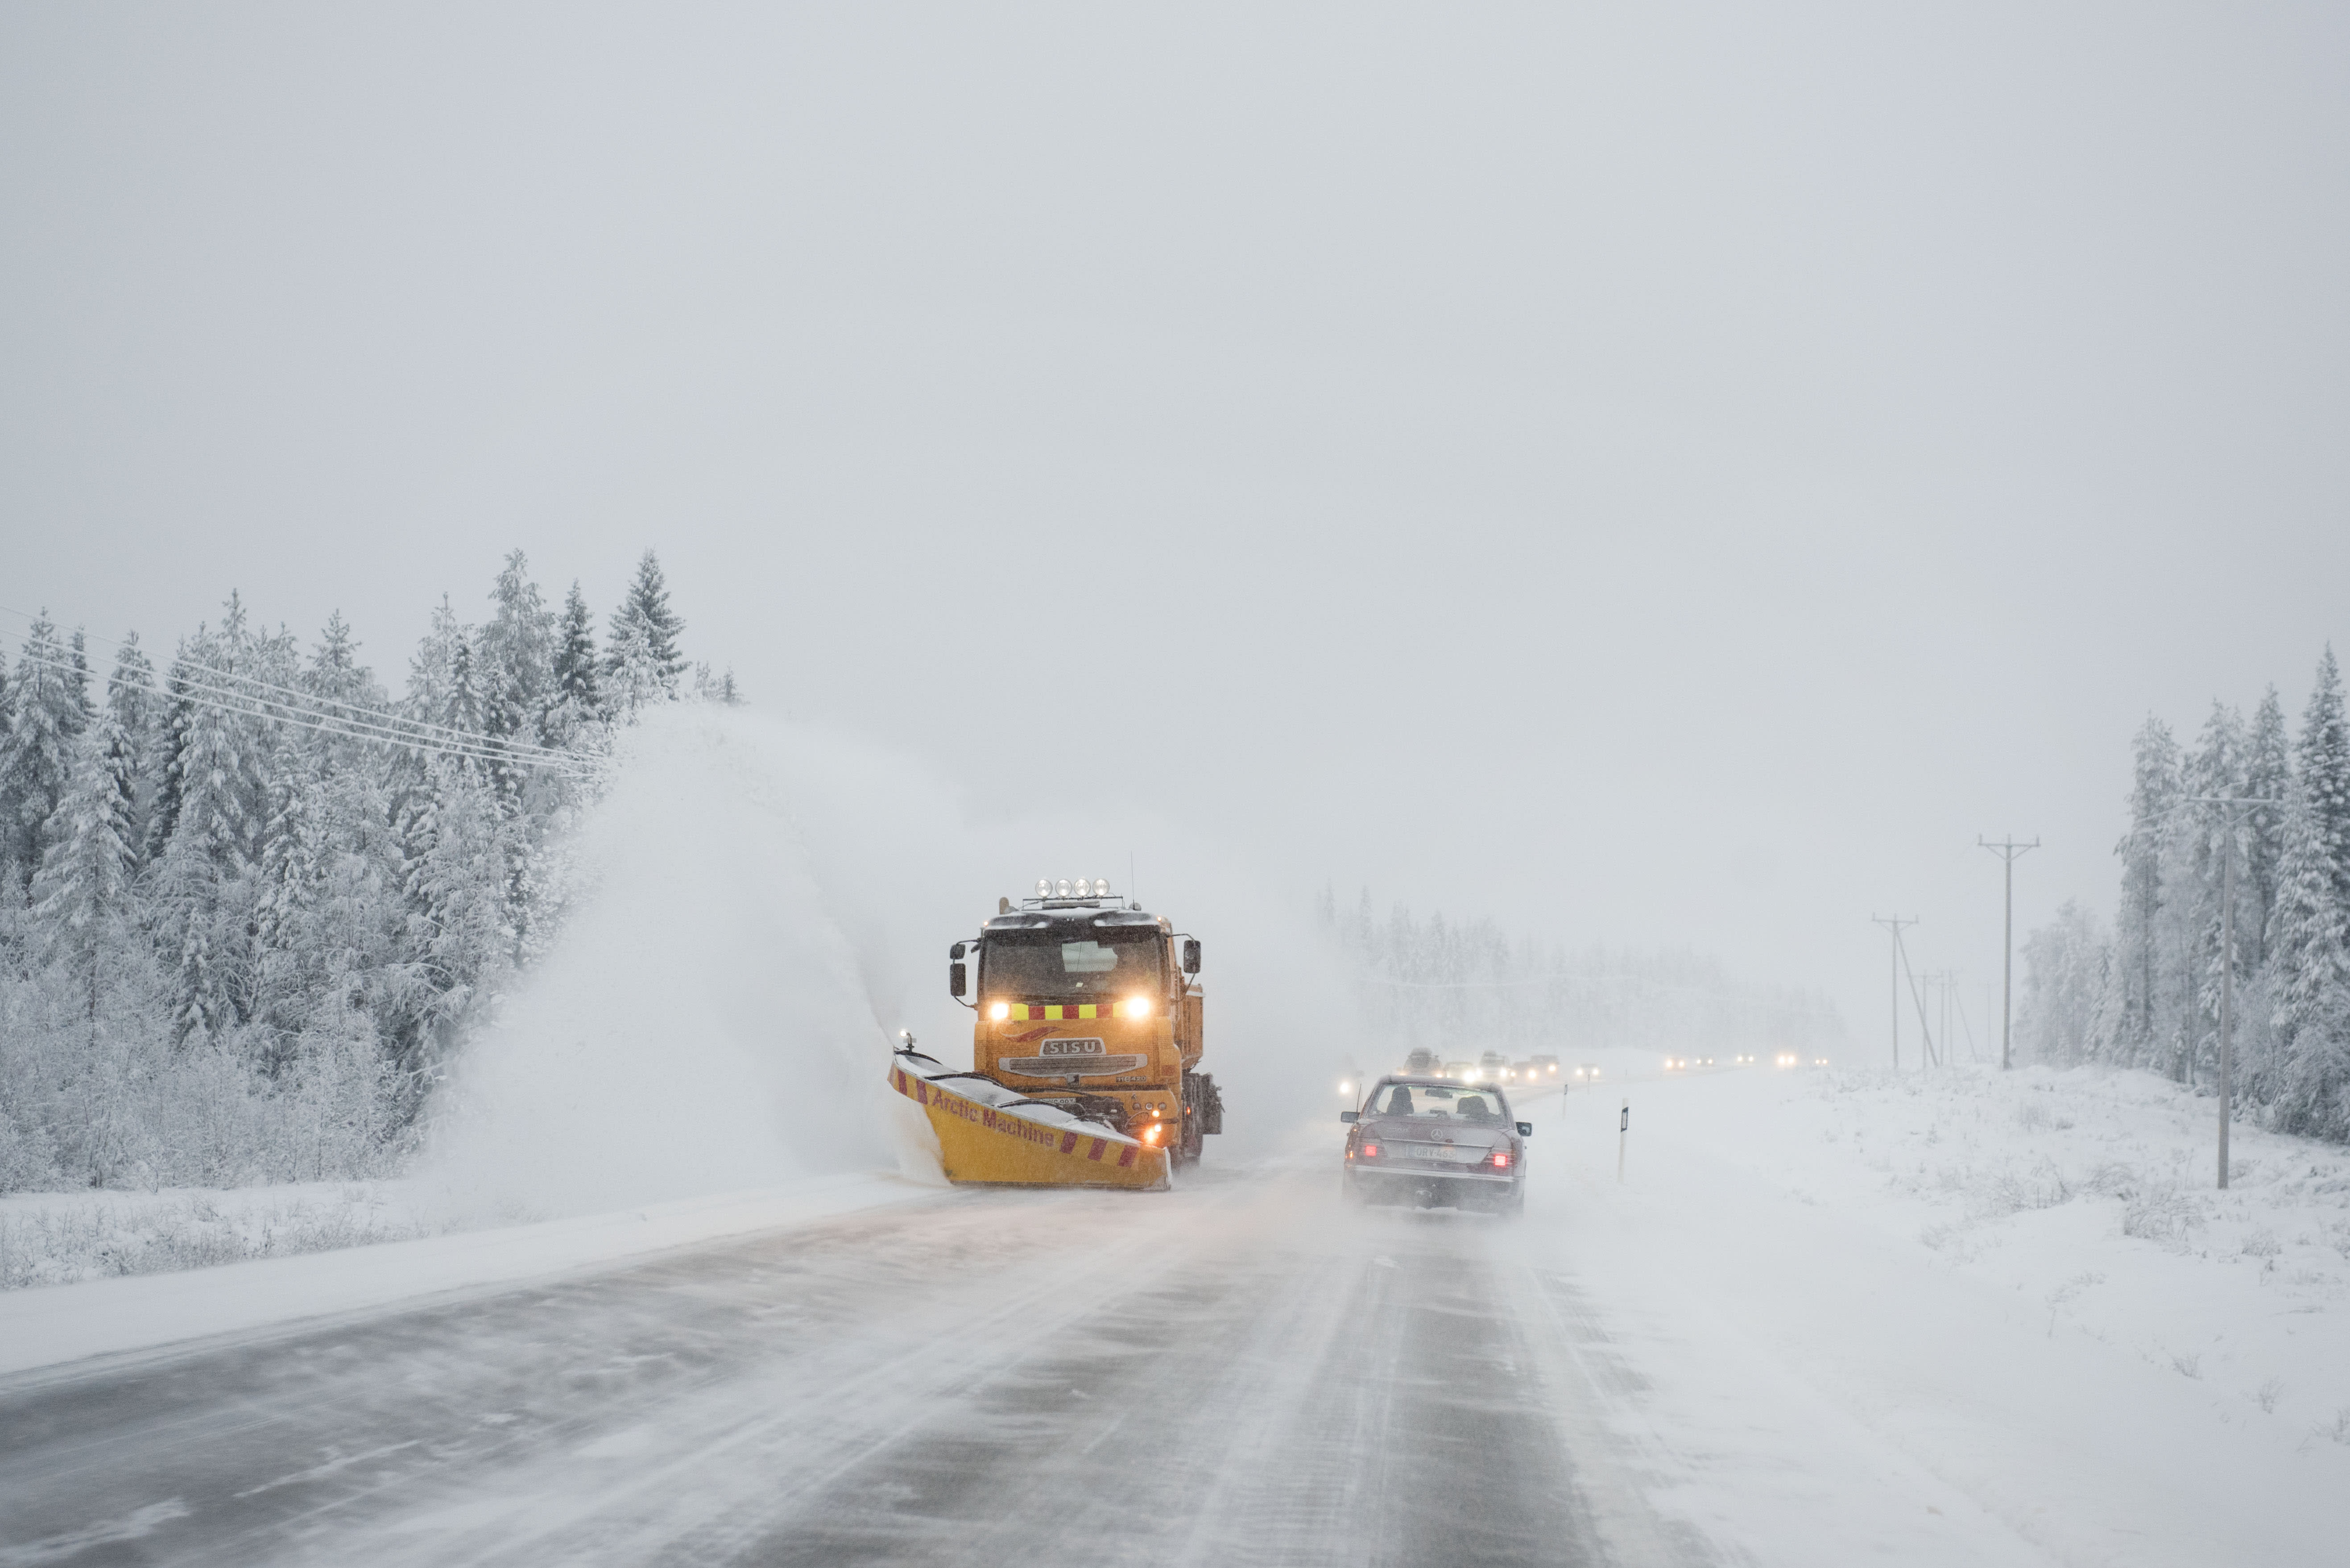 Finland is preparing for another snowstorm on Wednesday evening